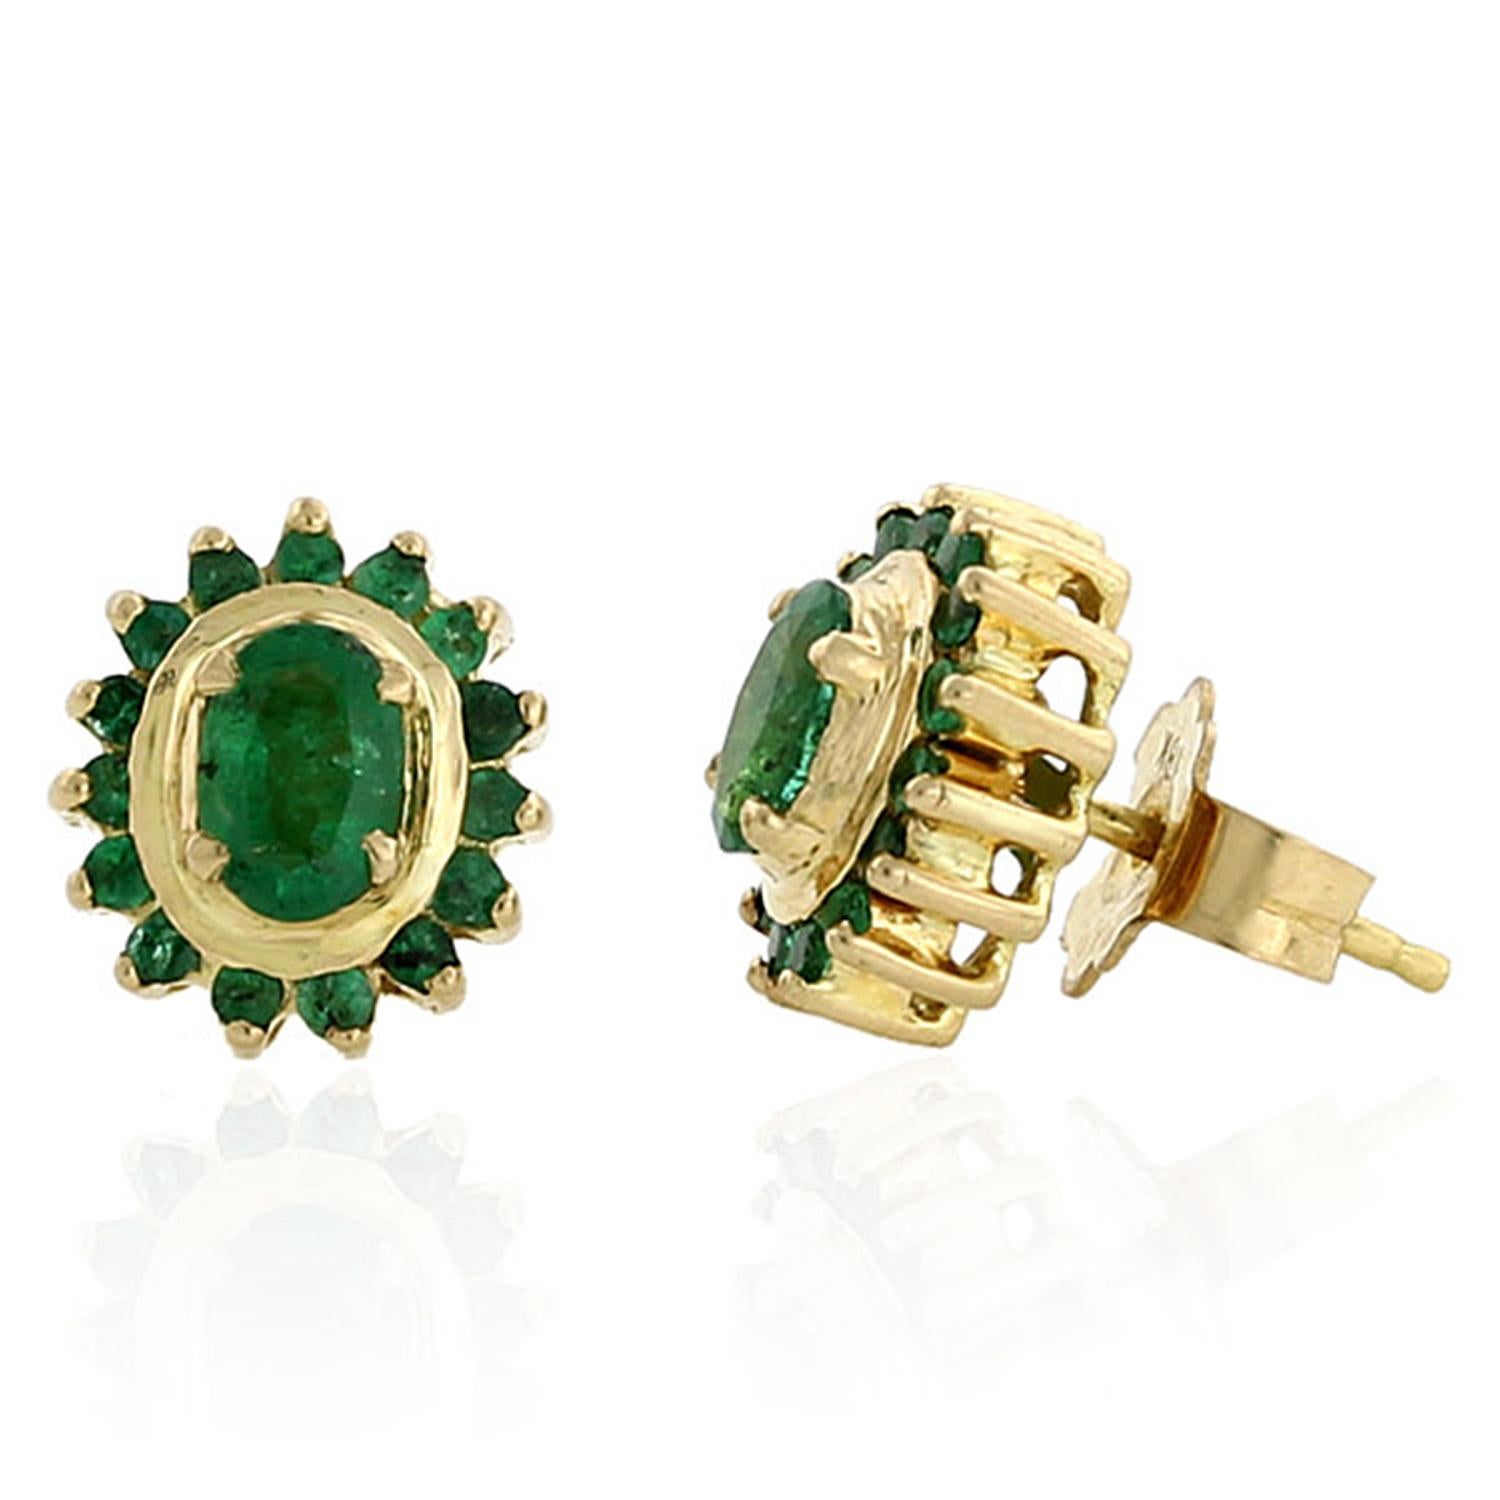 Cast from 18-karat gold.  These beautiful stud earrings are hand set with 1.0 carats emerald

FOLLOW  MEGHNA JEWELS storefront to view the latest collection & exclusive pieces.  Meghna Jewels is proudly rated as a Top Seller on 1stdibs with 5 star